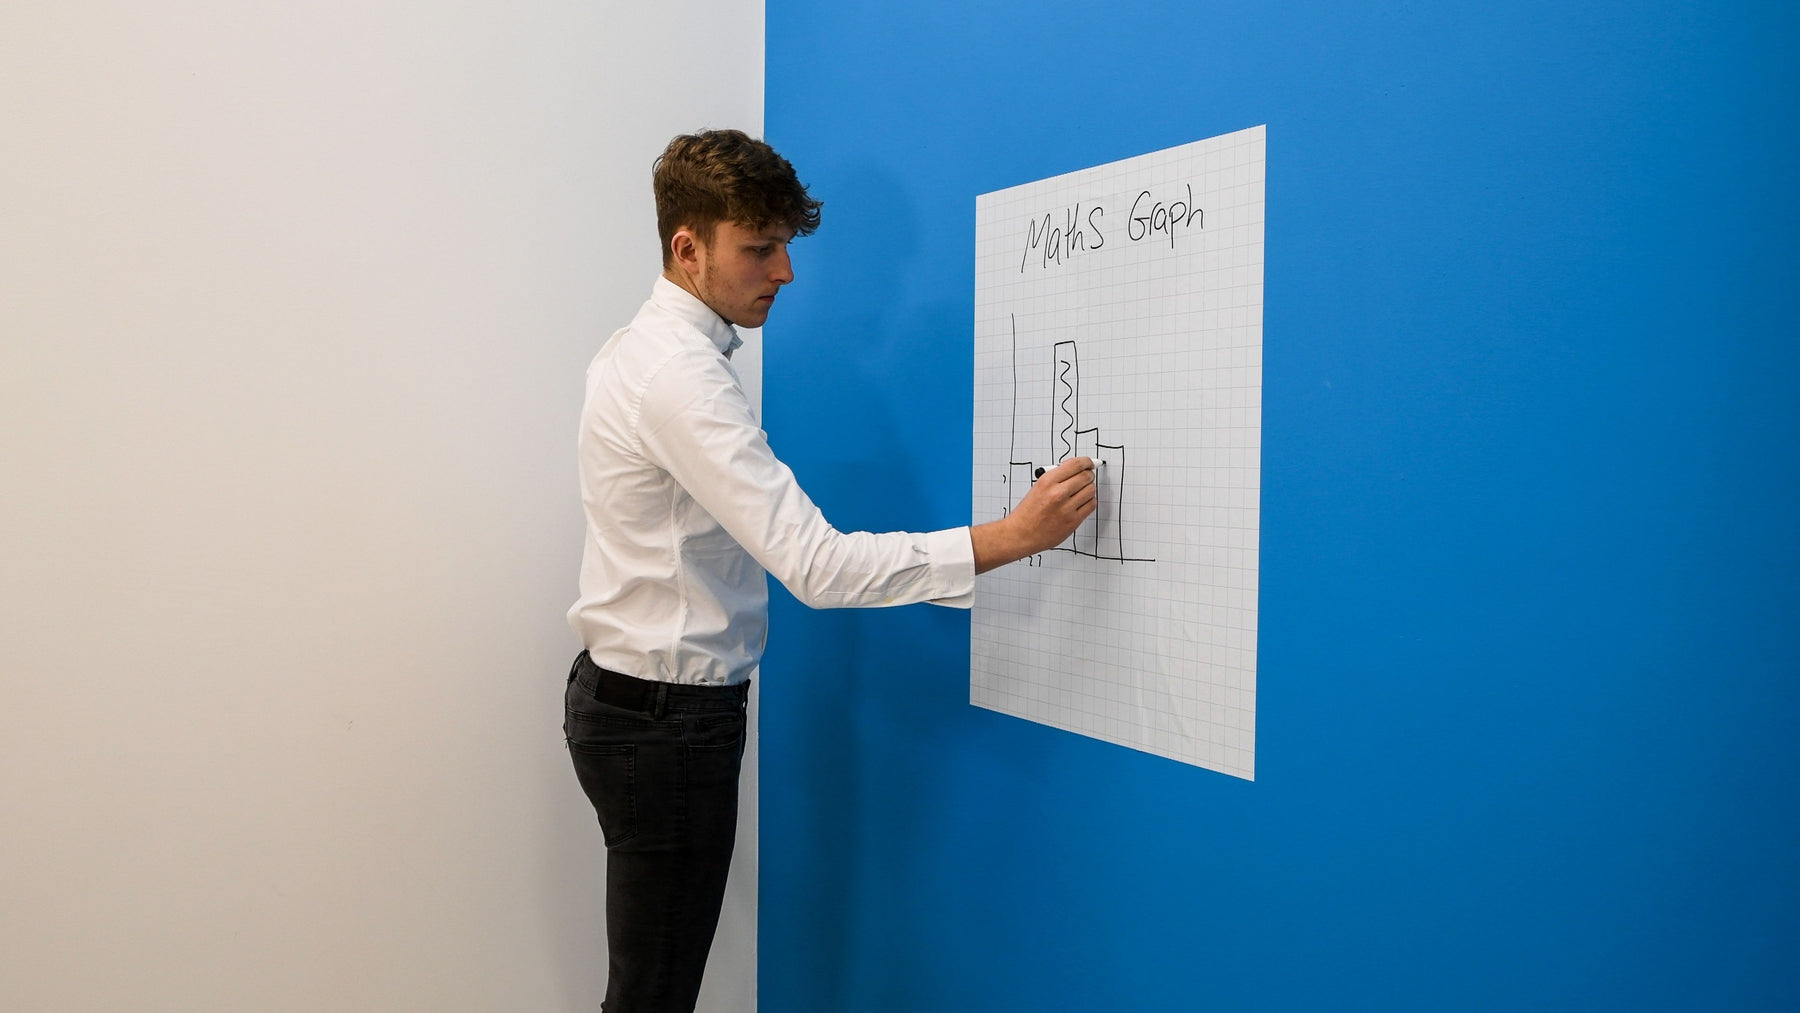 How to use Gridded Magic Whiteboard